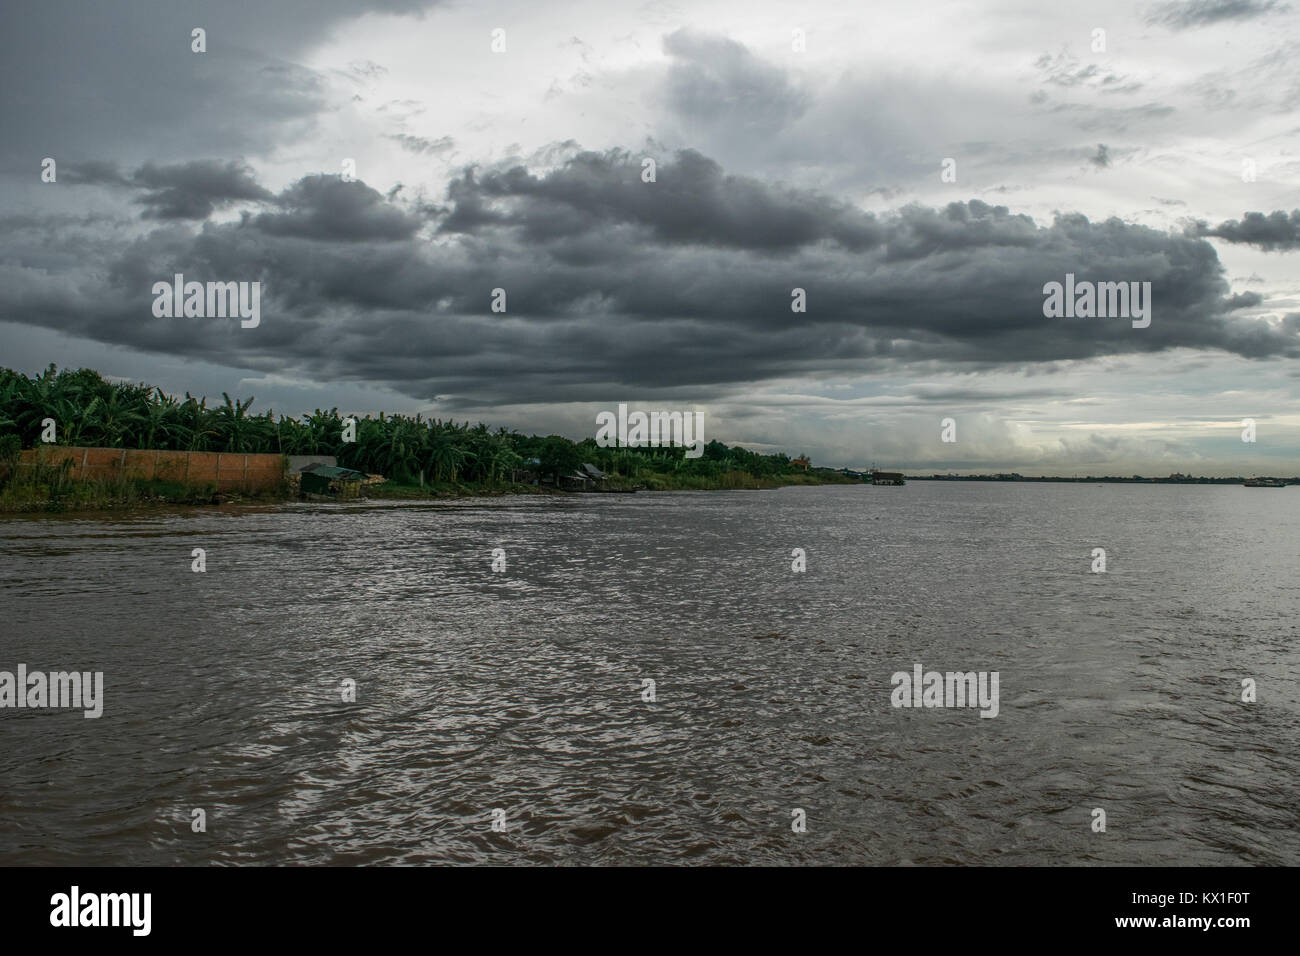 A patch of low dark thick clouds floating over the Mekong river, river bank. Rainy clouds during Monsoon season in Phnom Penh, Cambodia, SE Asia Stock Photo